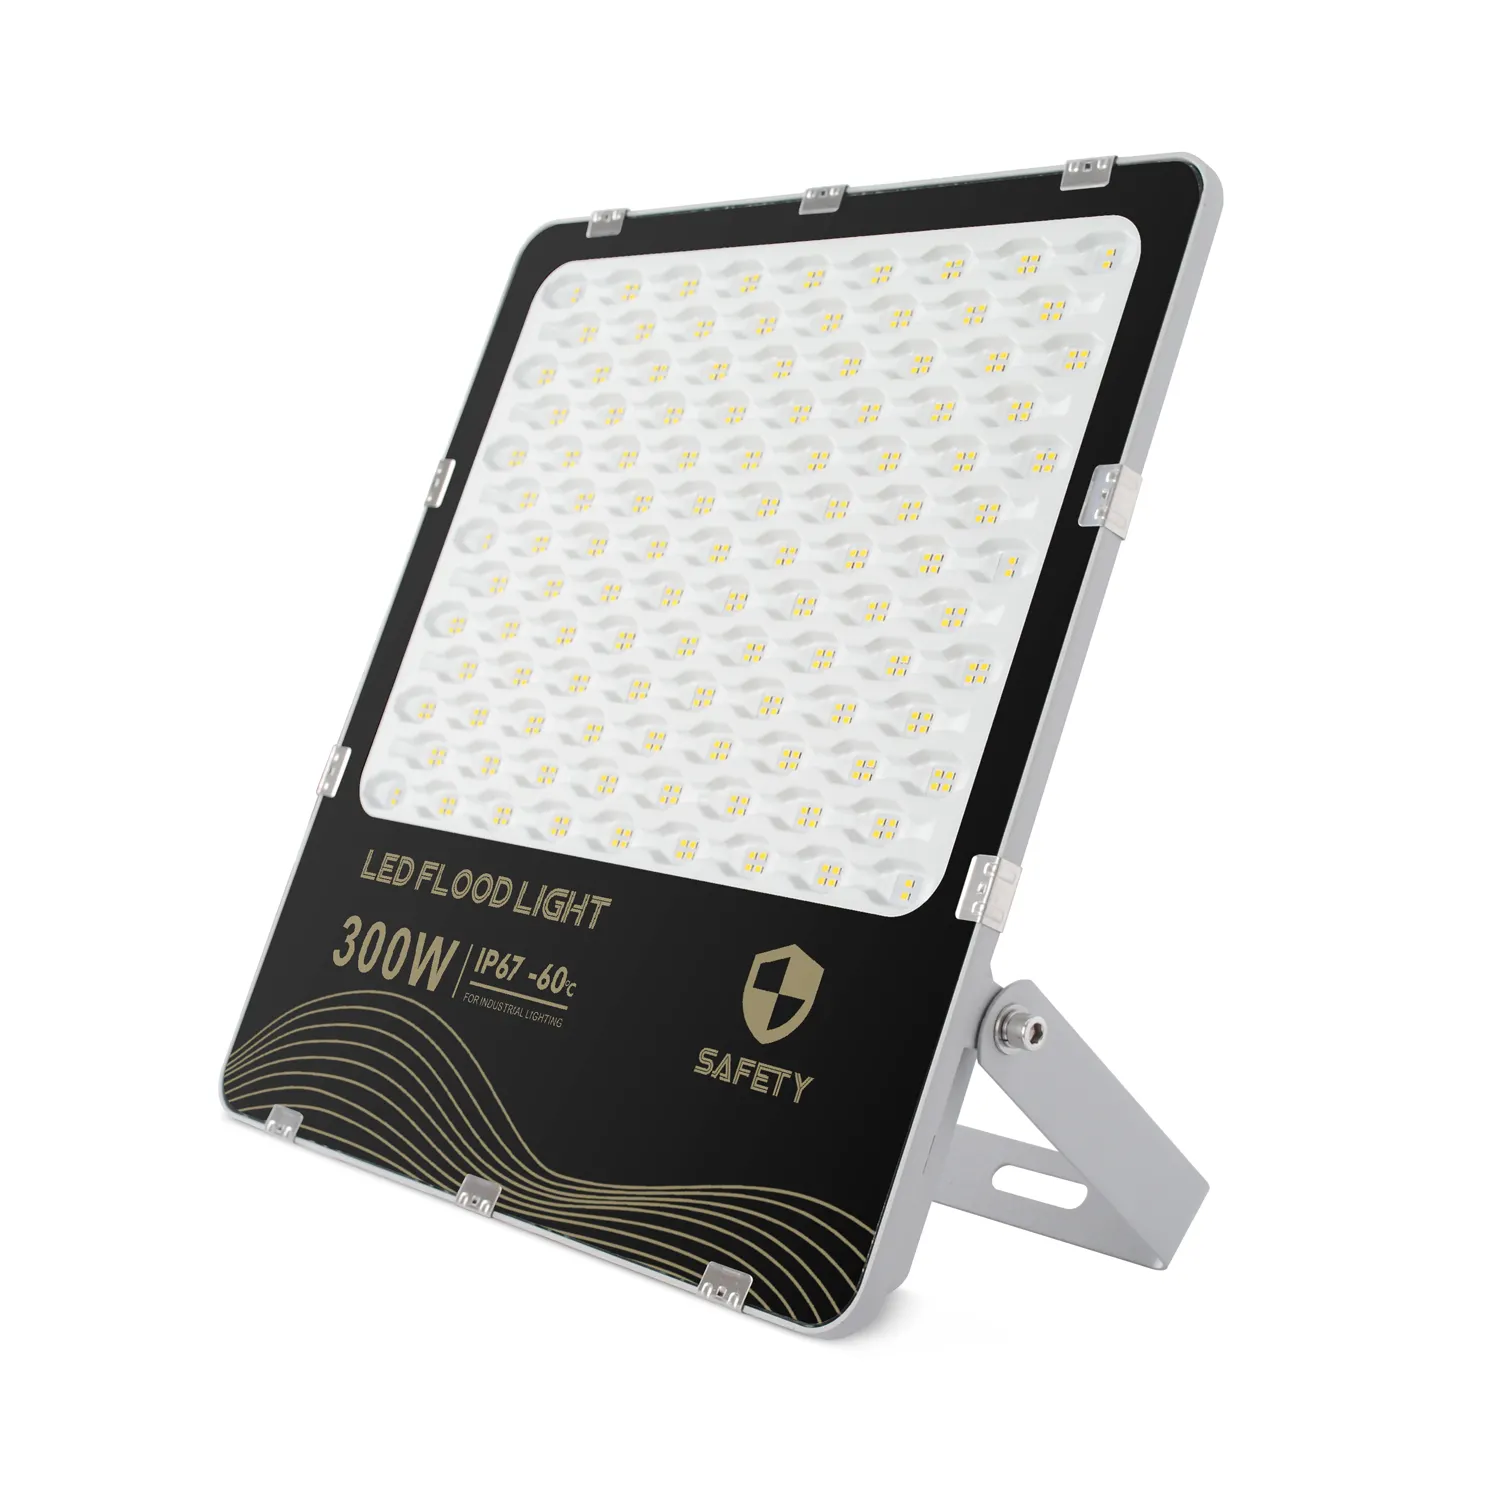 Led Flood Light Made In China Best-selling Outdoor LED Flood Light 300W LED Flood Light